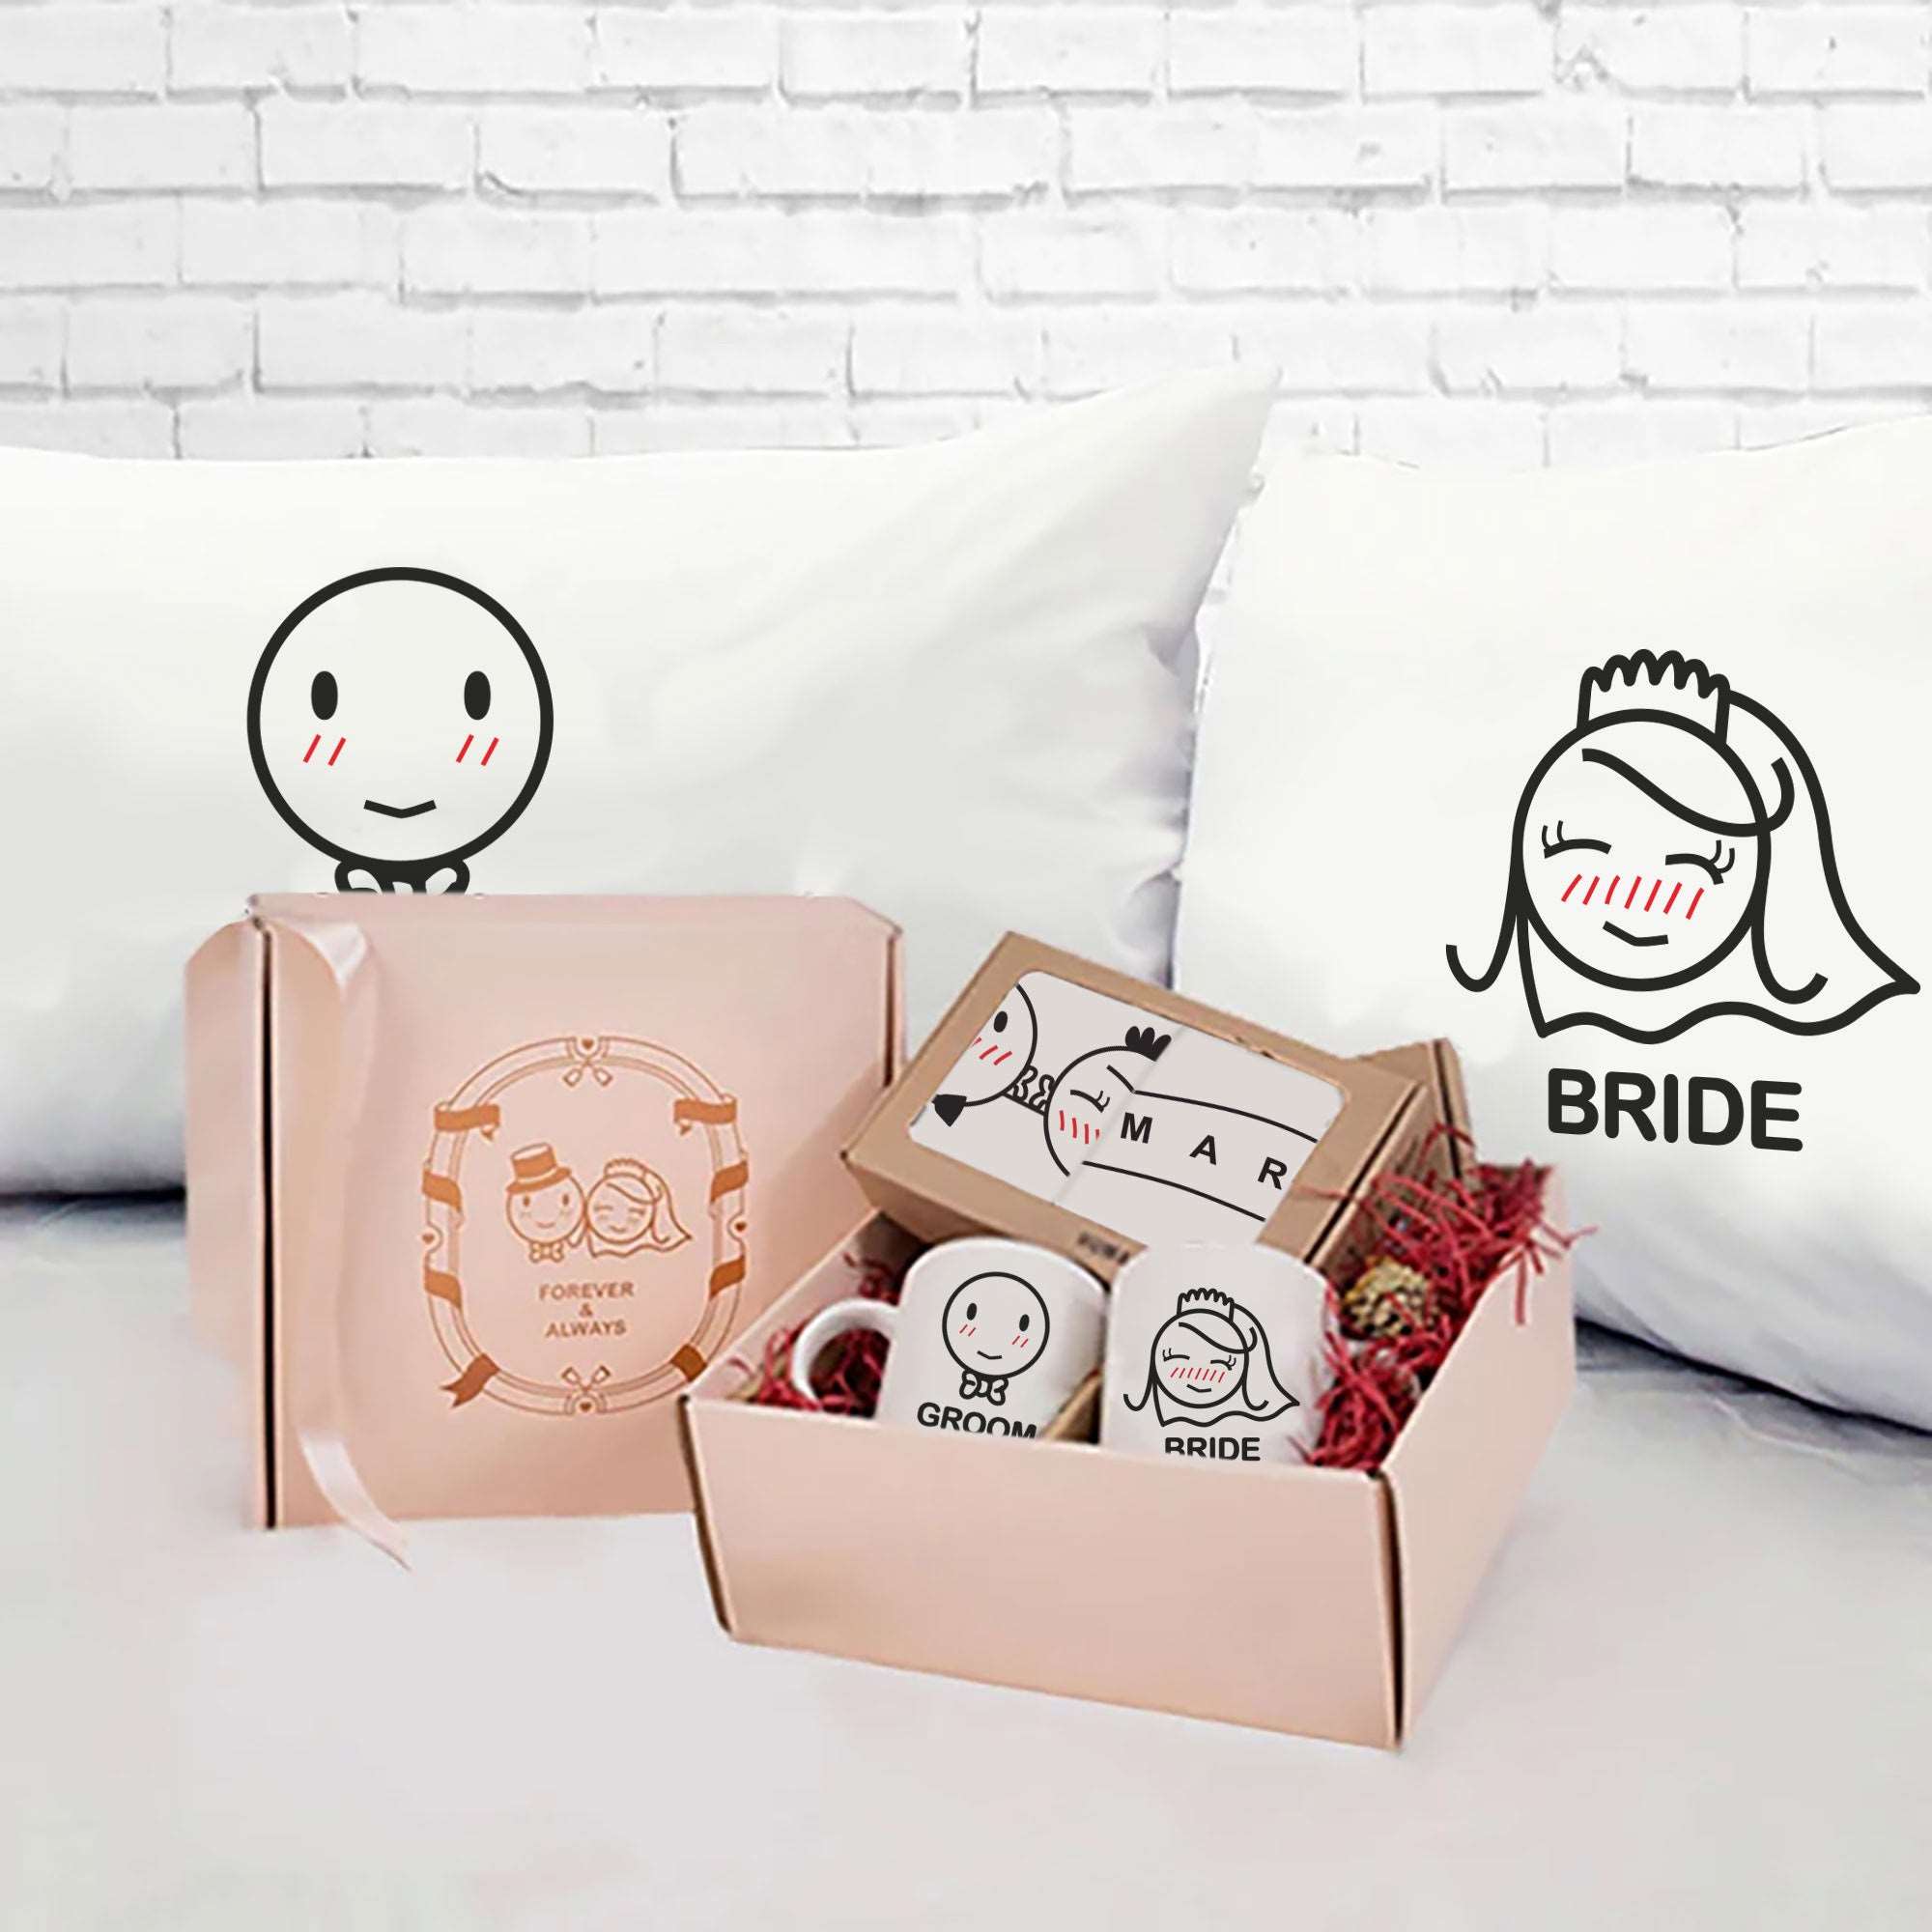 Bride and Groom gift set